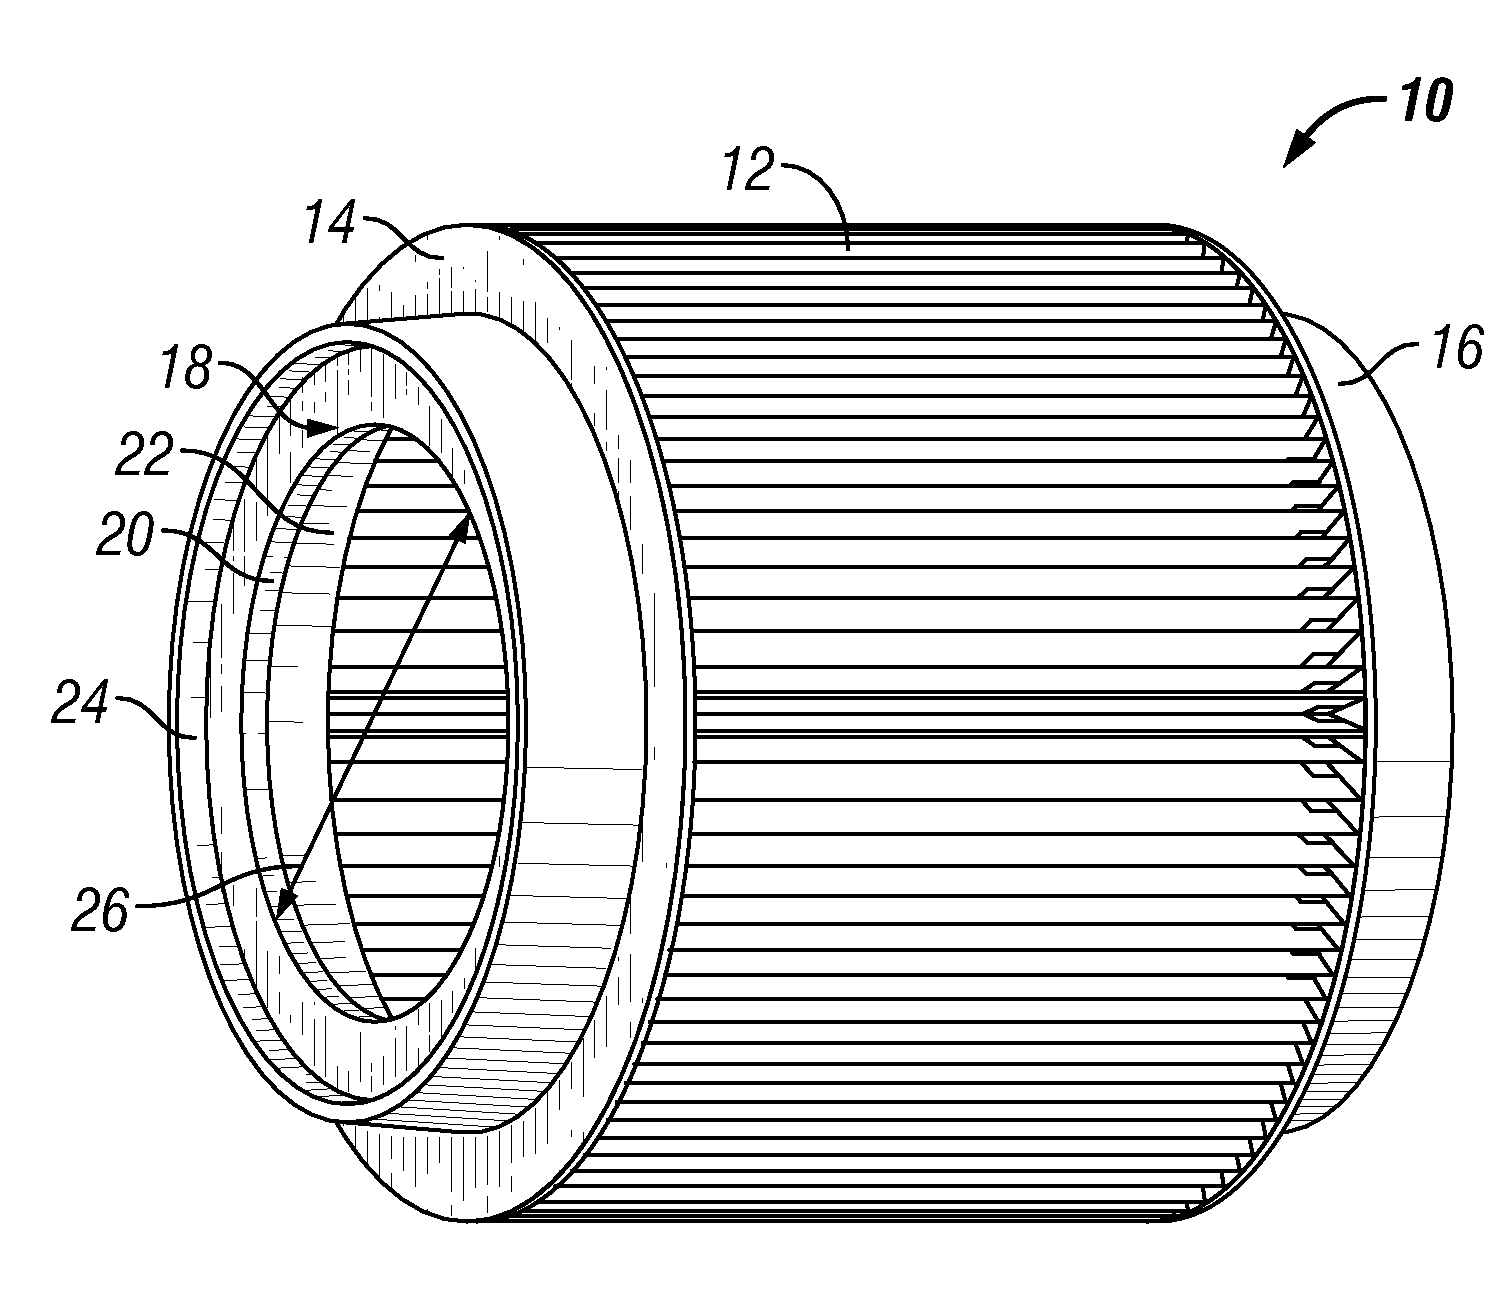 Filter and system for improved sealing on a vacuum cleaner